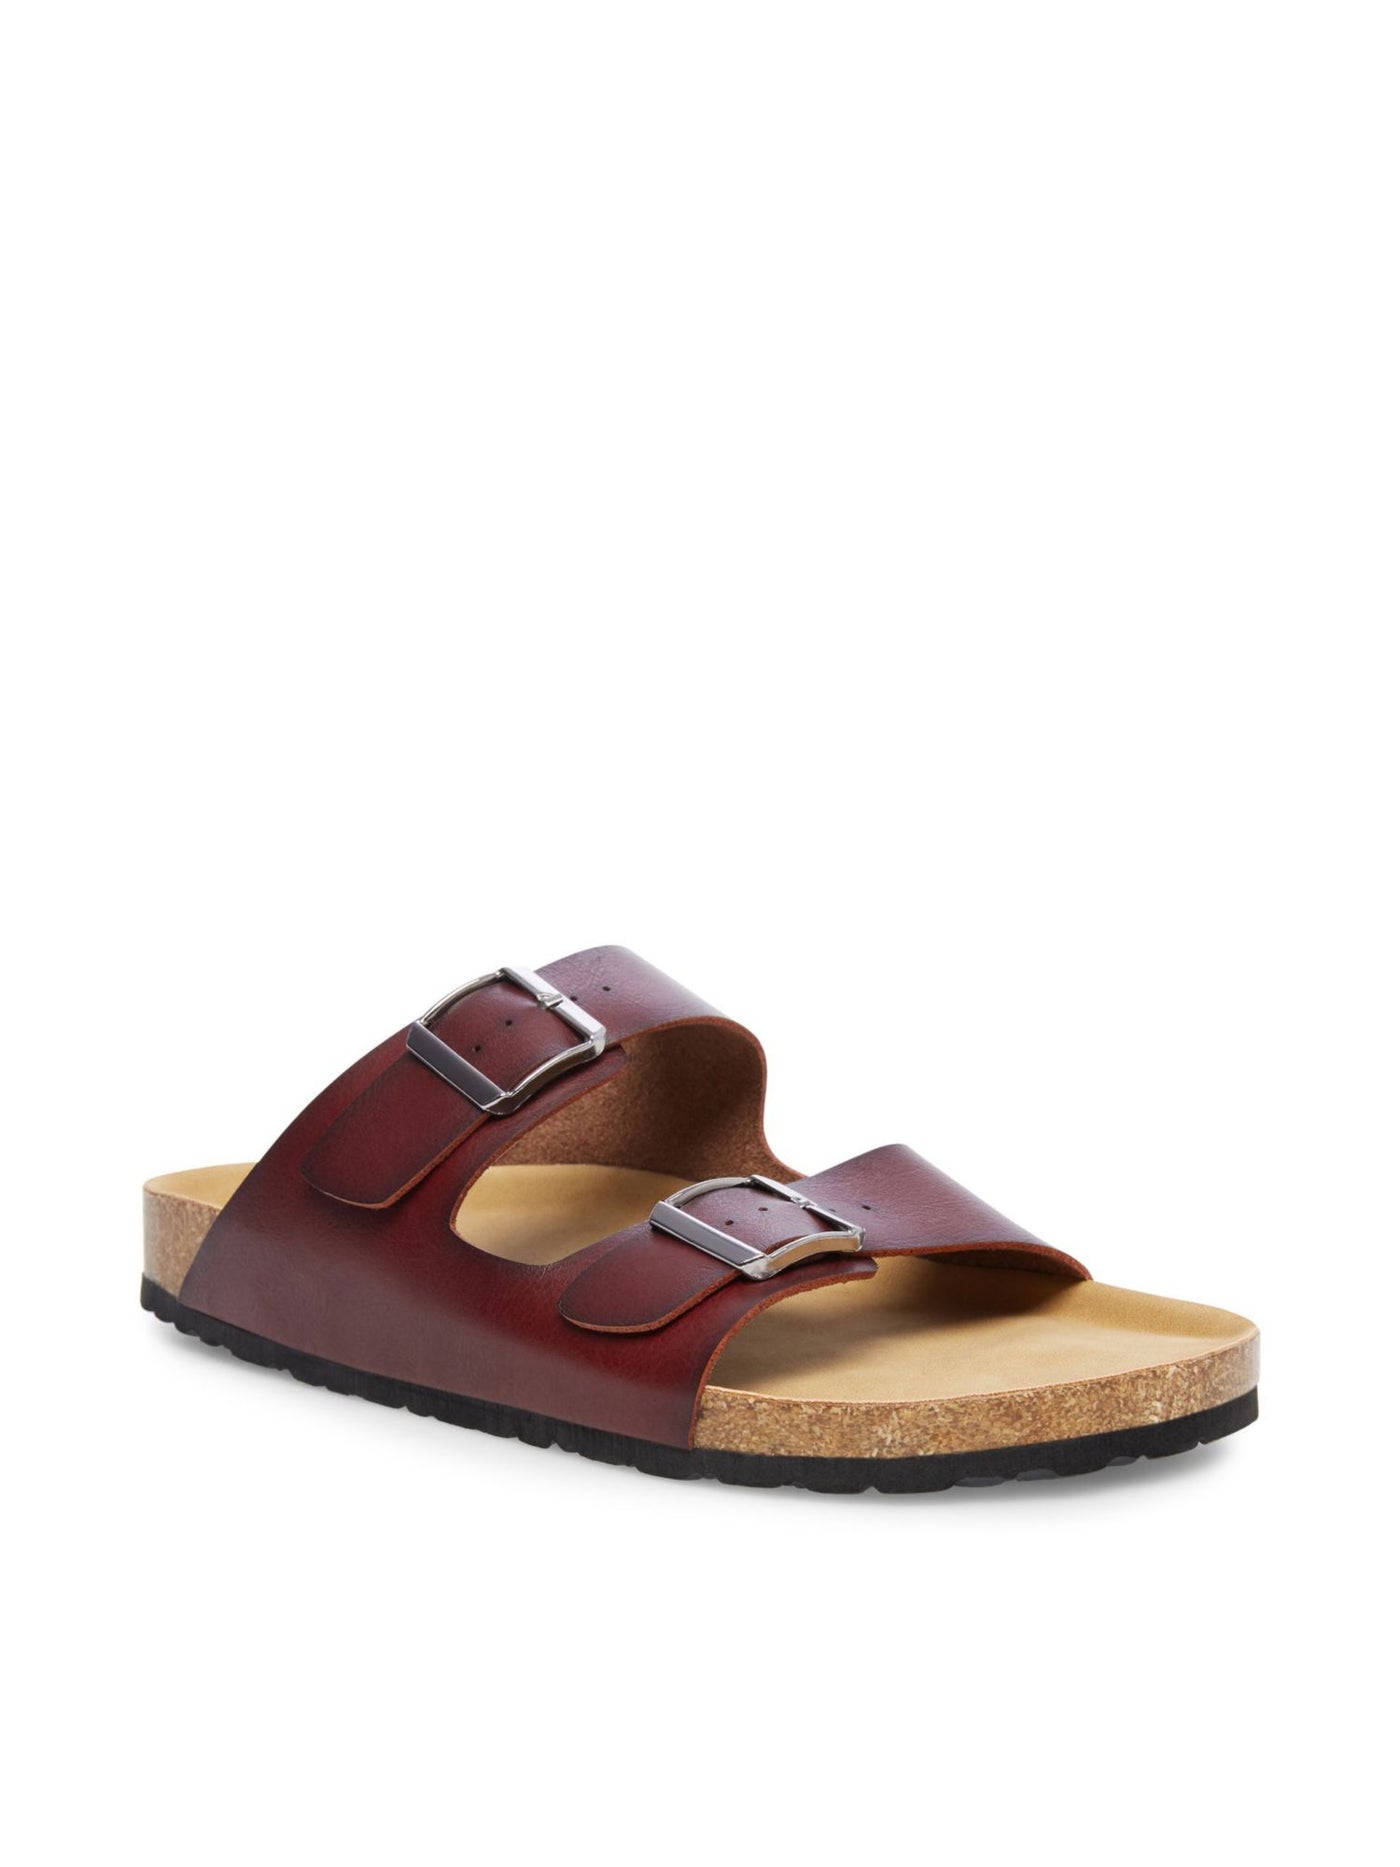 MADDEN Mens Maroon Adjustable Padded Tafted Open Toe Buckle Slide Sandals Shoes 10 M